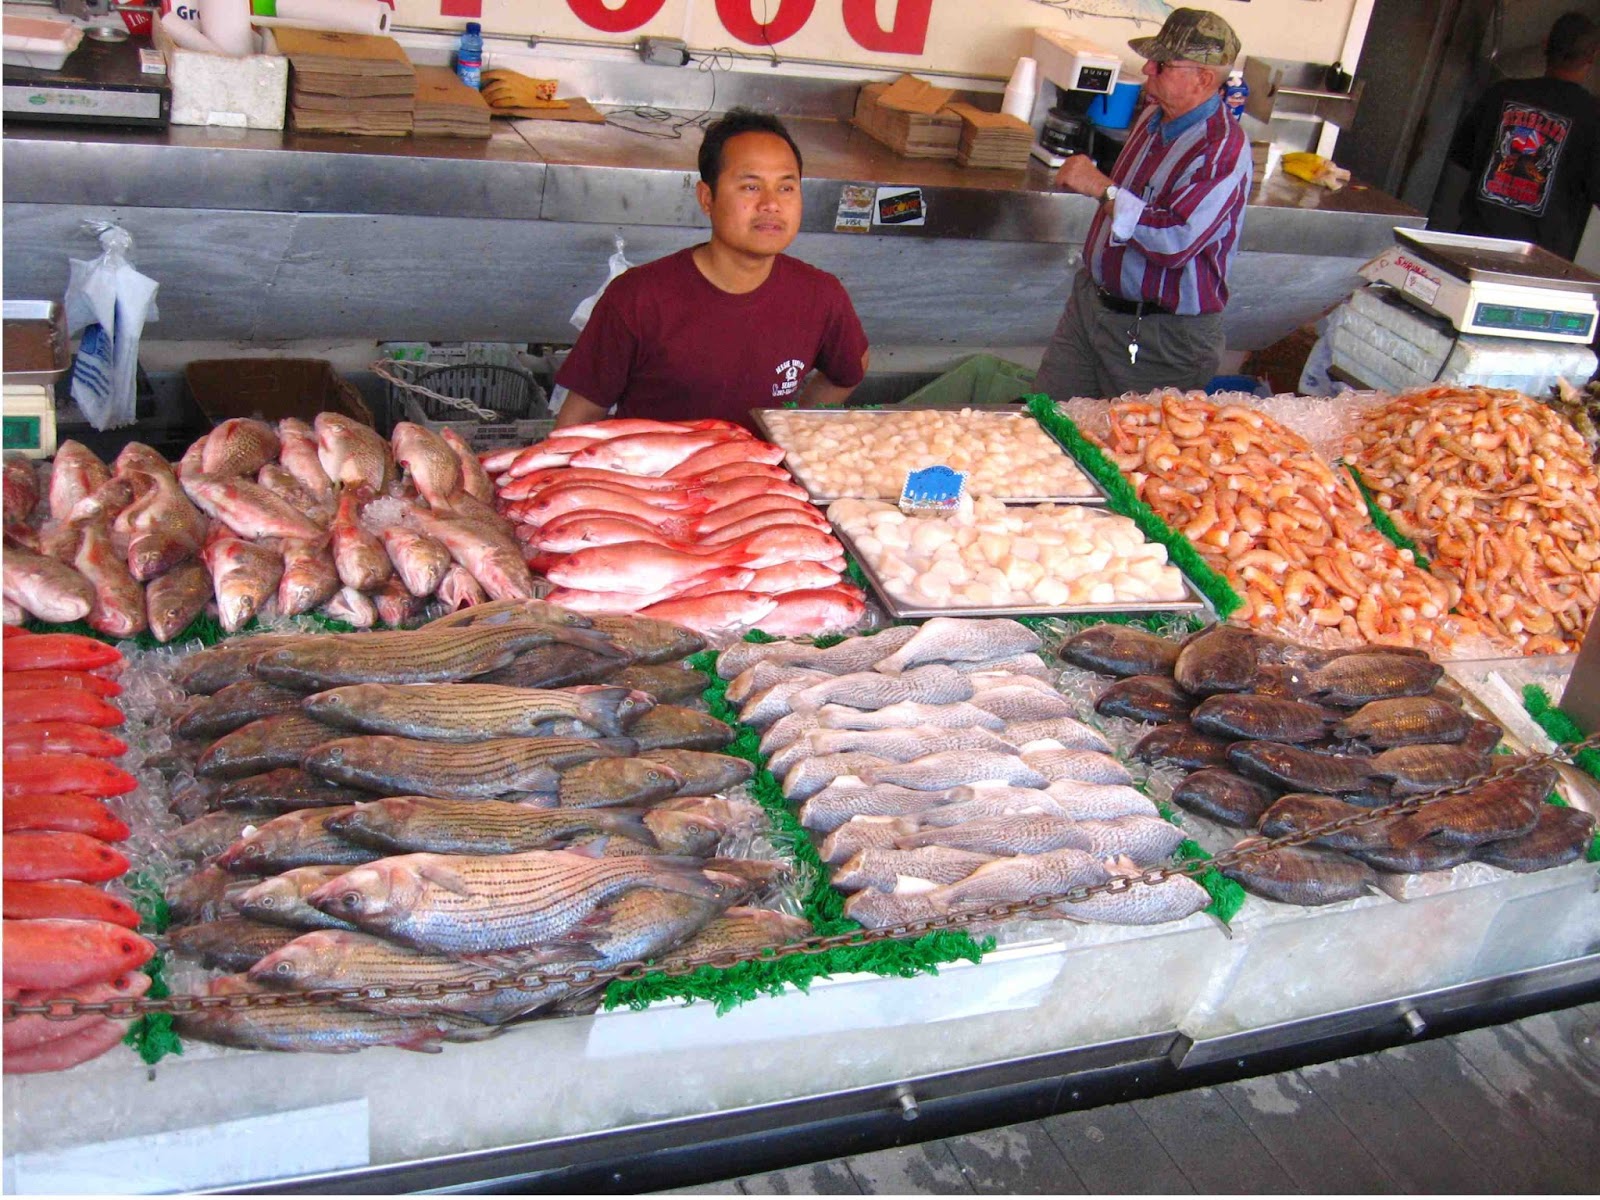 Econs 101: The Fresh Fish Market - A Perfect Competition